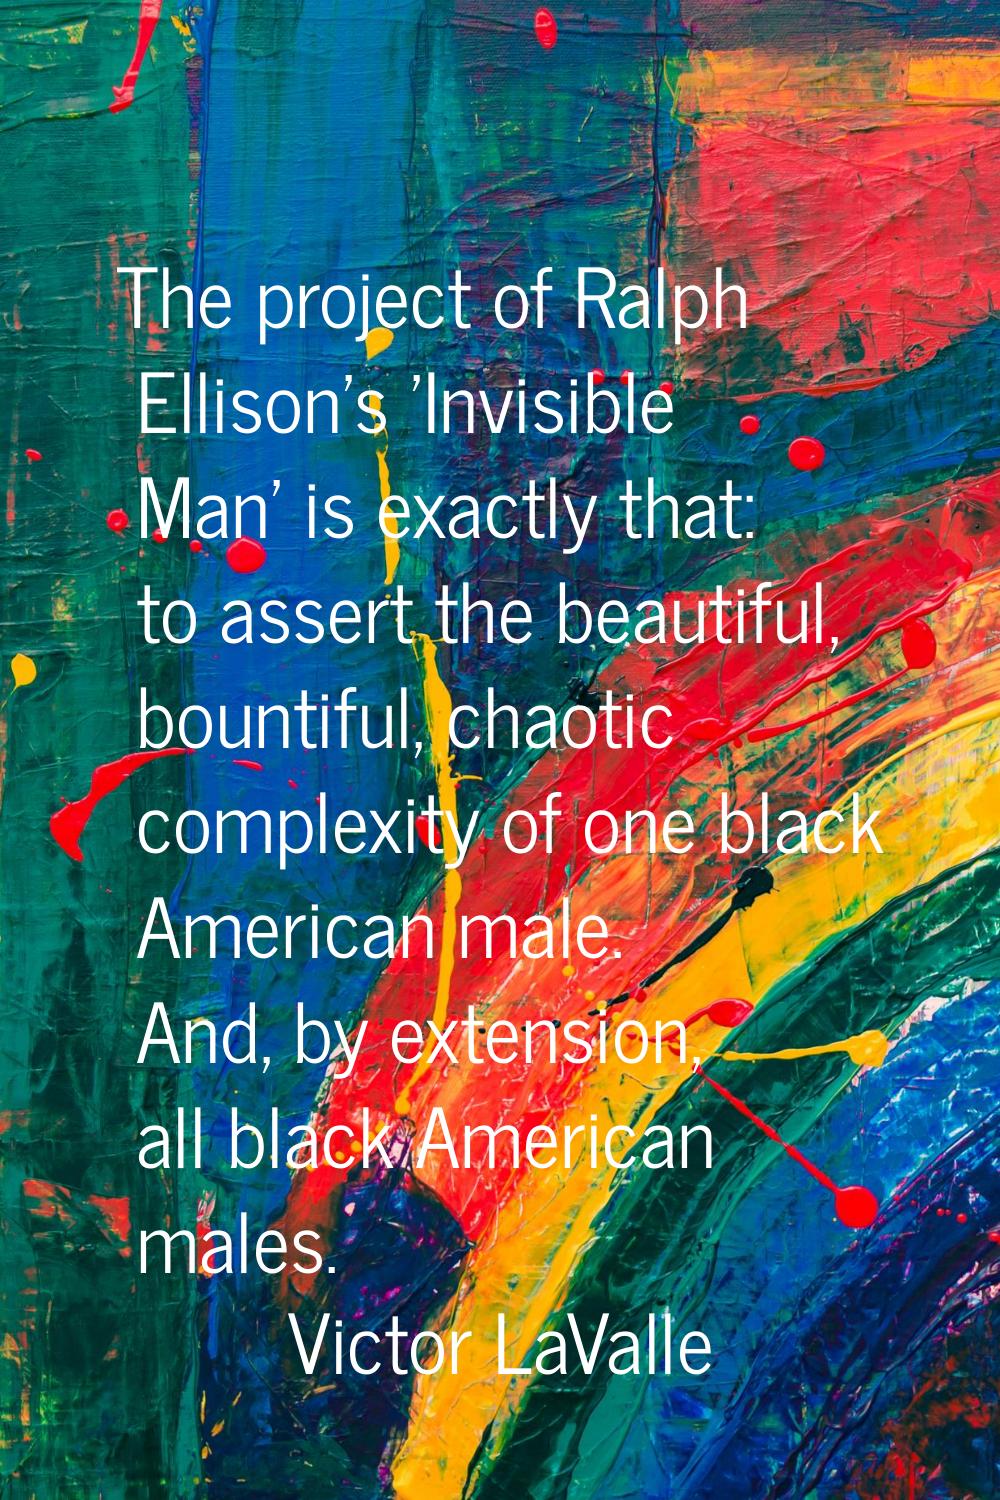 The project of Ralph Ellison's 'Invisible Man' is exactly that: to assert the beautiful, bountiful,